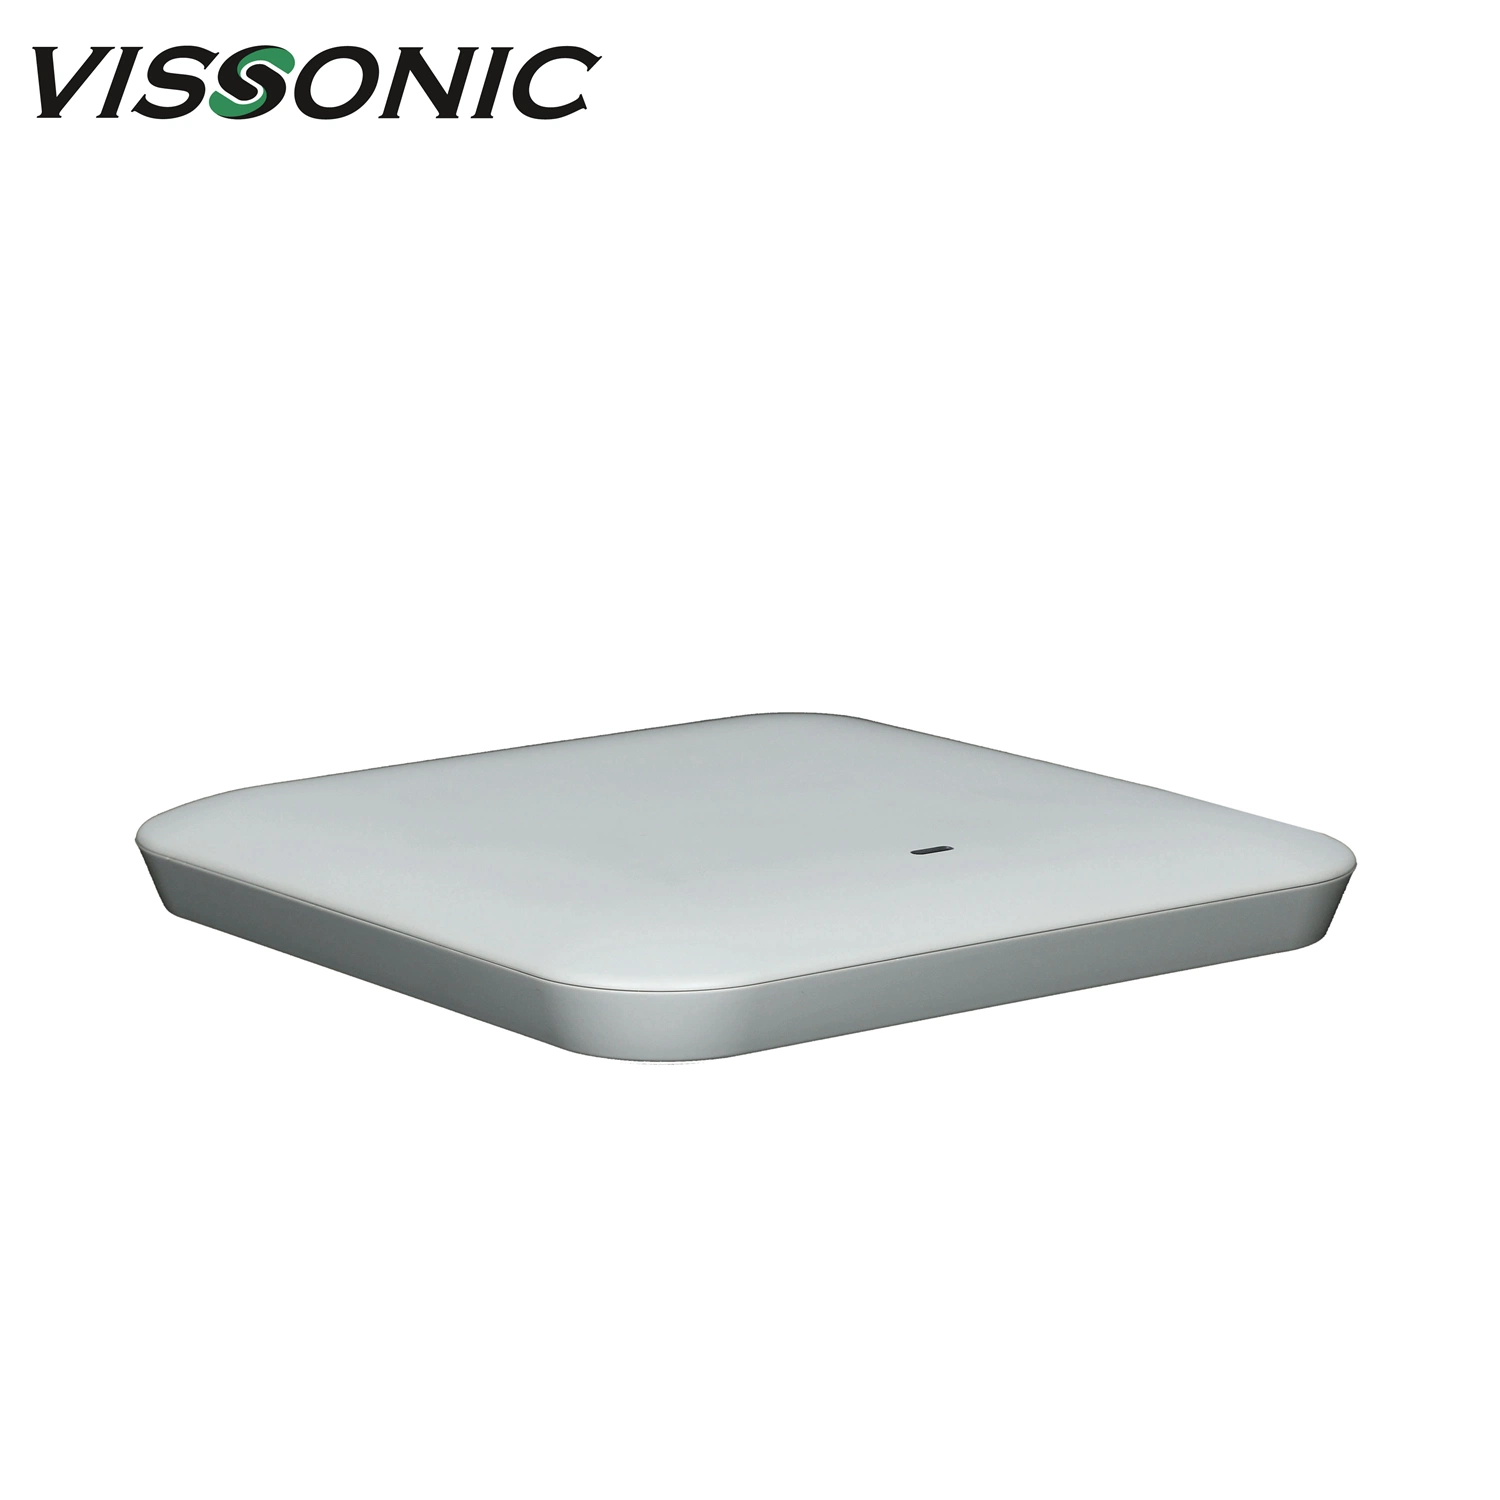 5GHz Channel Wireless Conference System Access Point